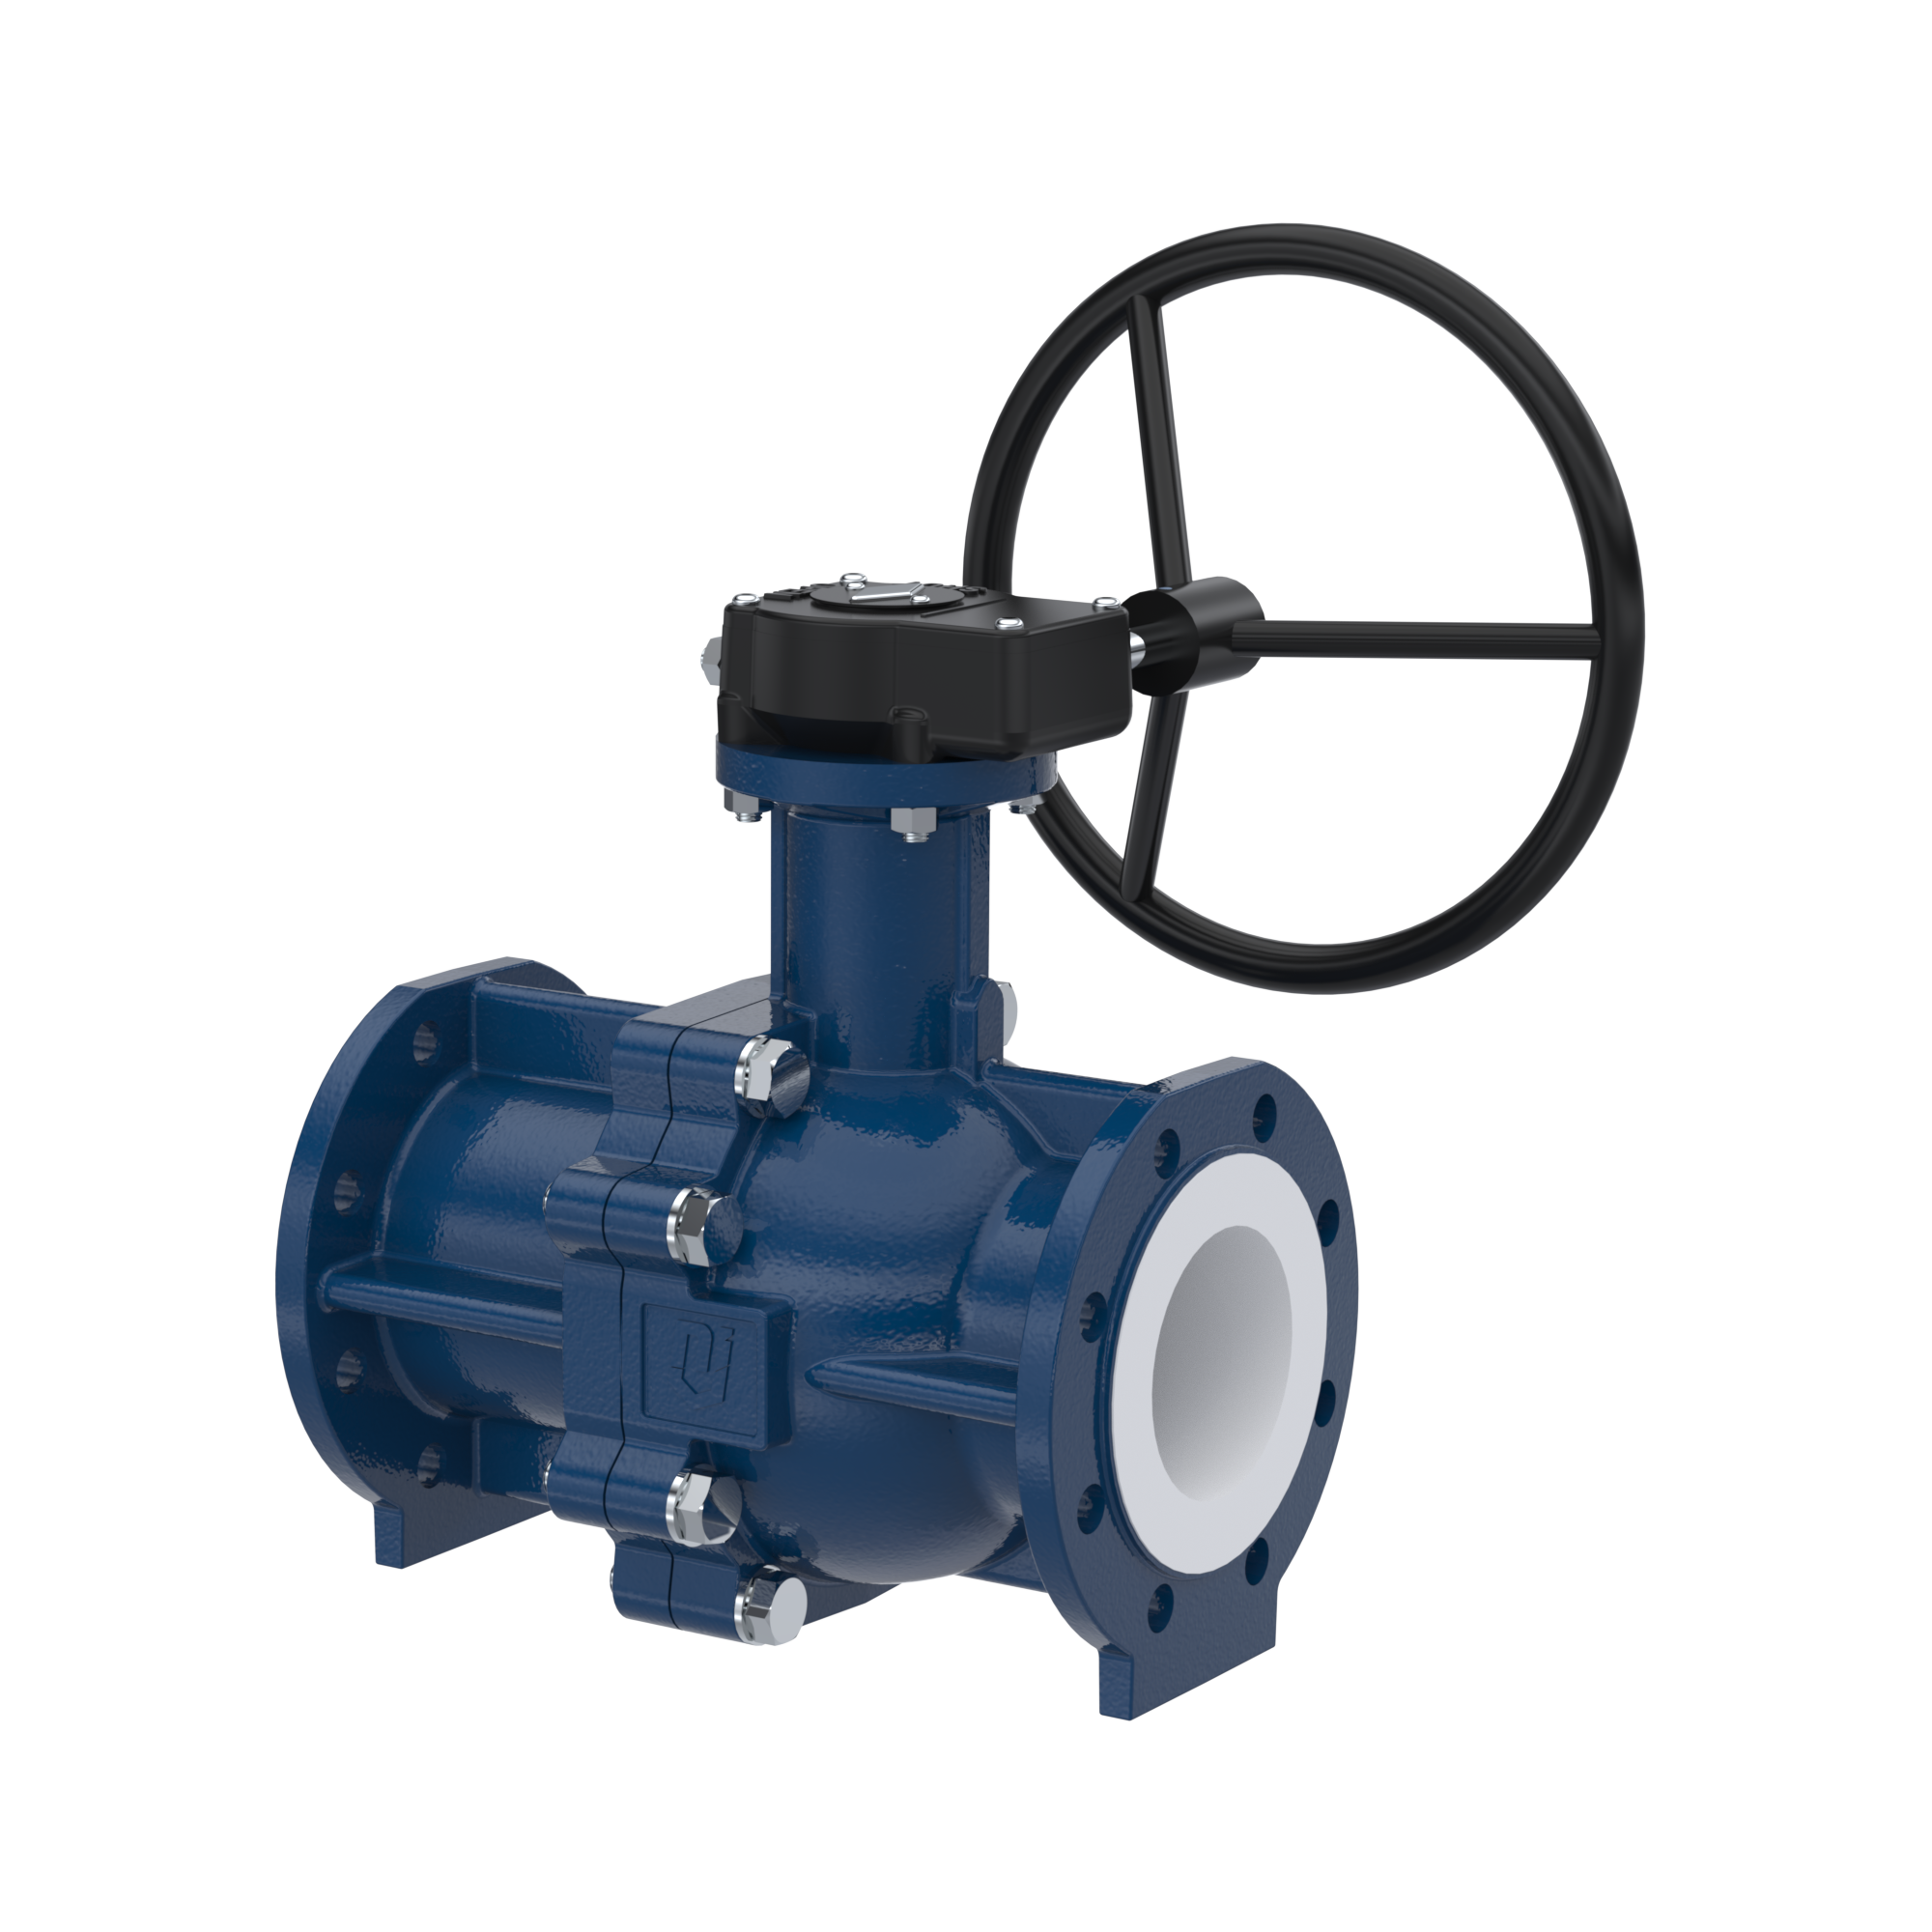 PFA-flange ball valve FK13 DN150 - 6" inch PN10/16 made of spheroidal graphite cast iron with worm gear